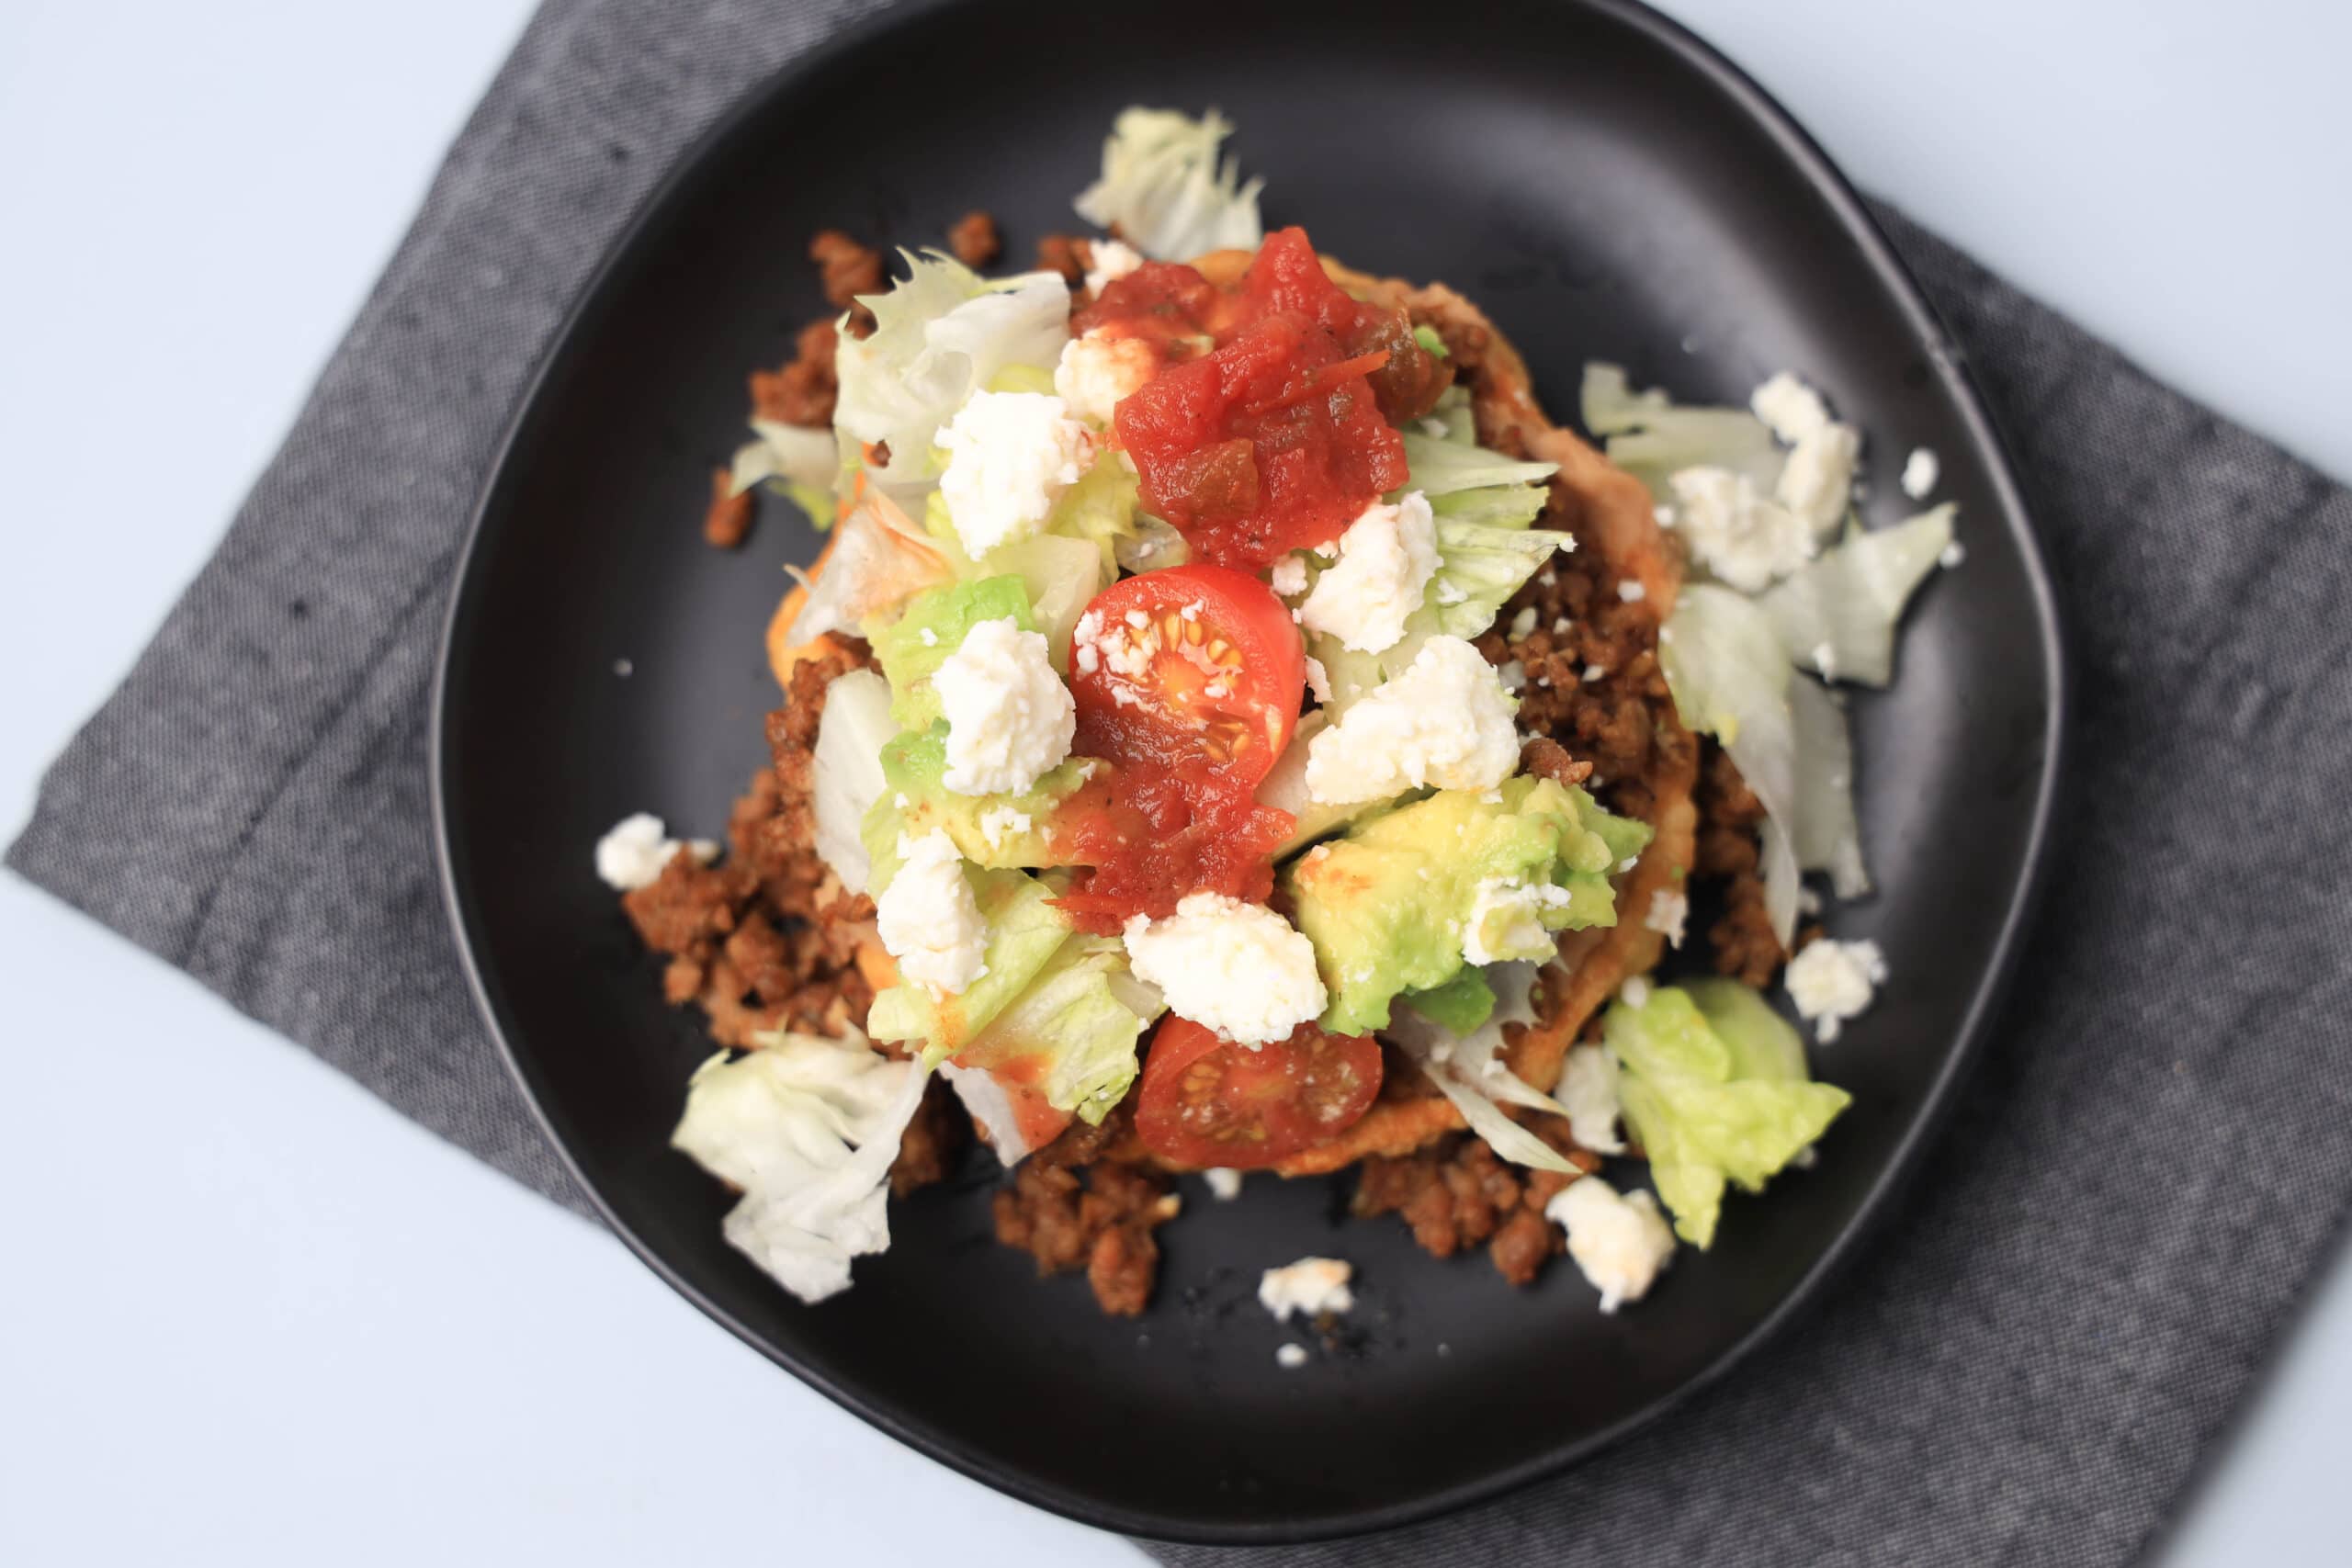 Sope in a black skillet with ground beef, avocado, tomatoes, and cheese topping.